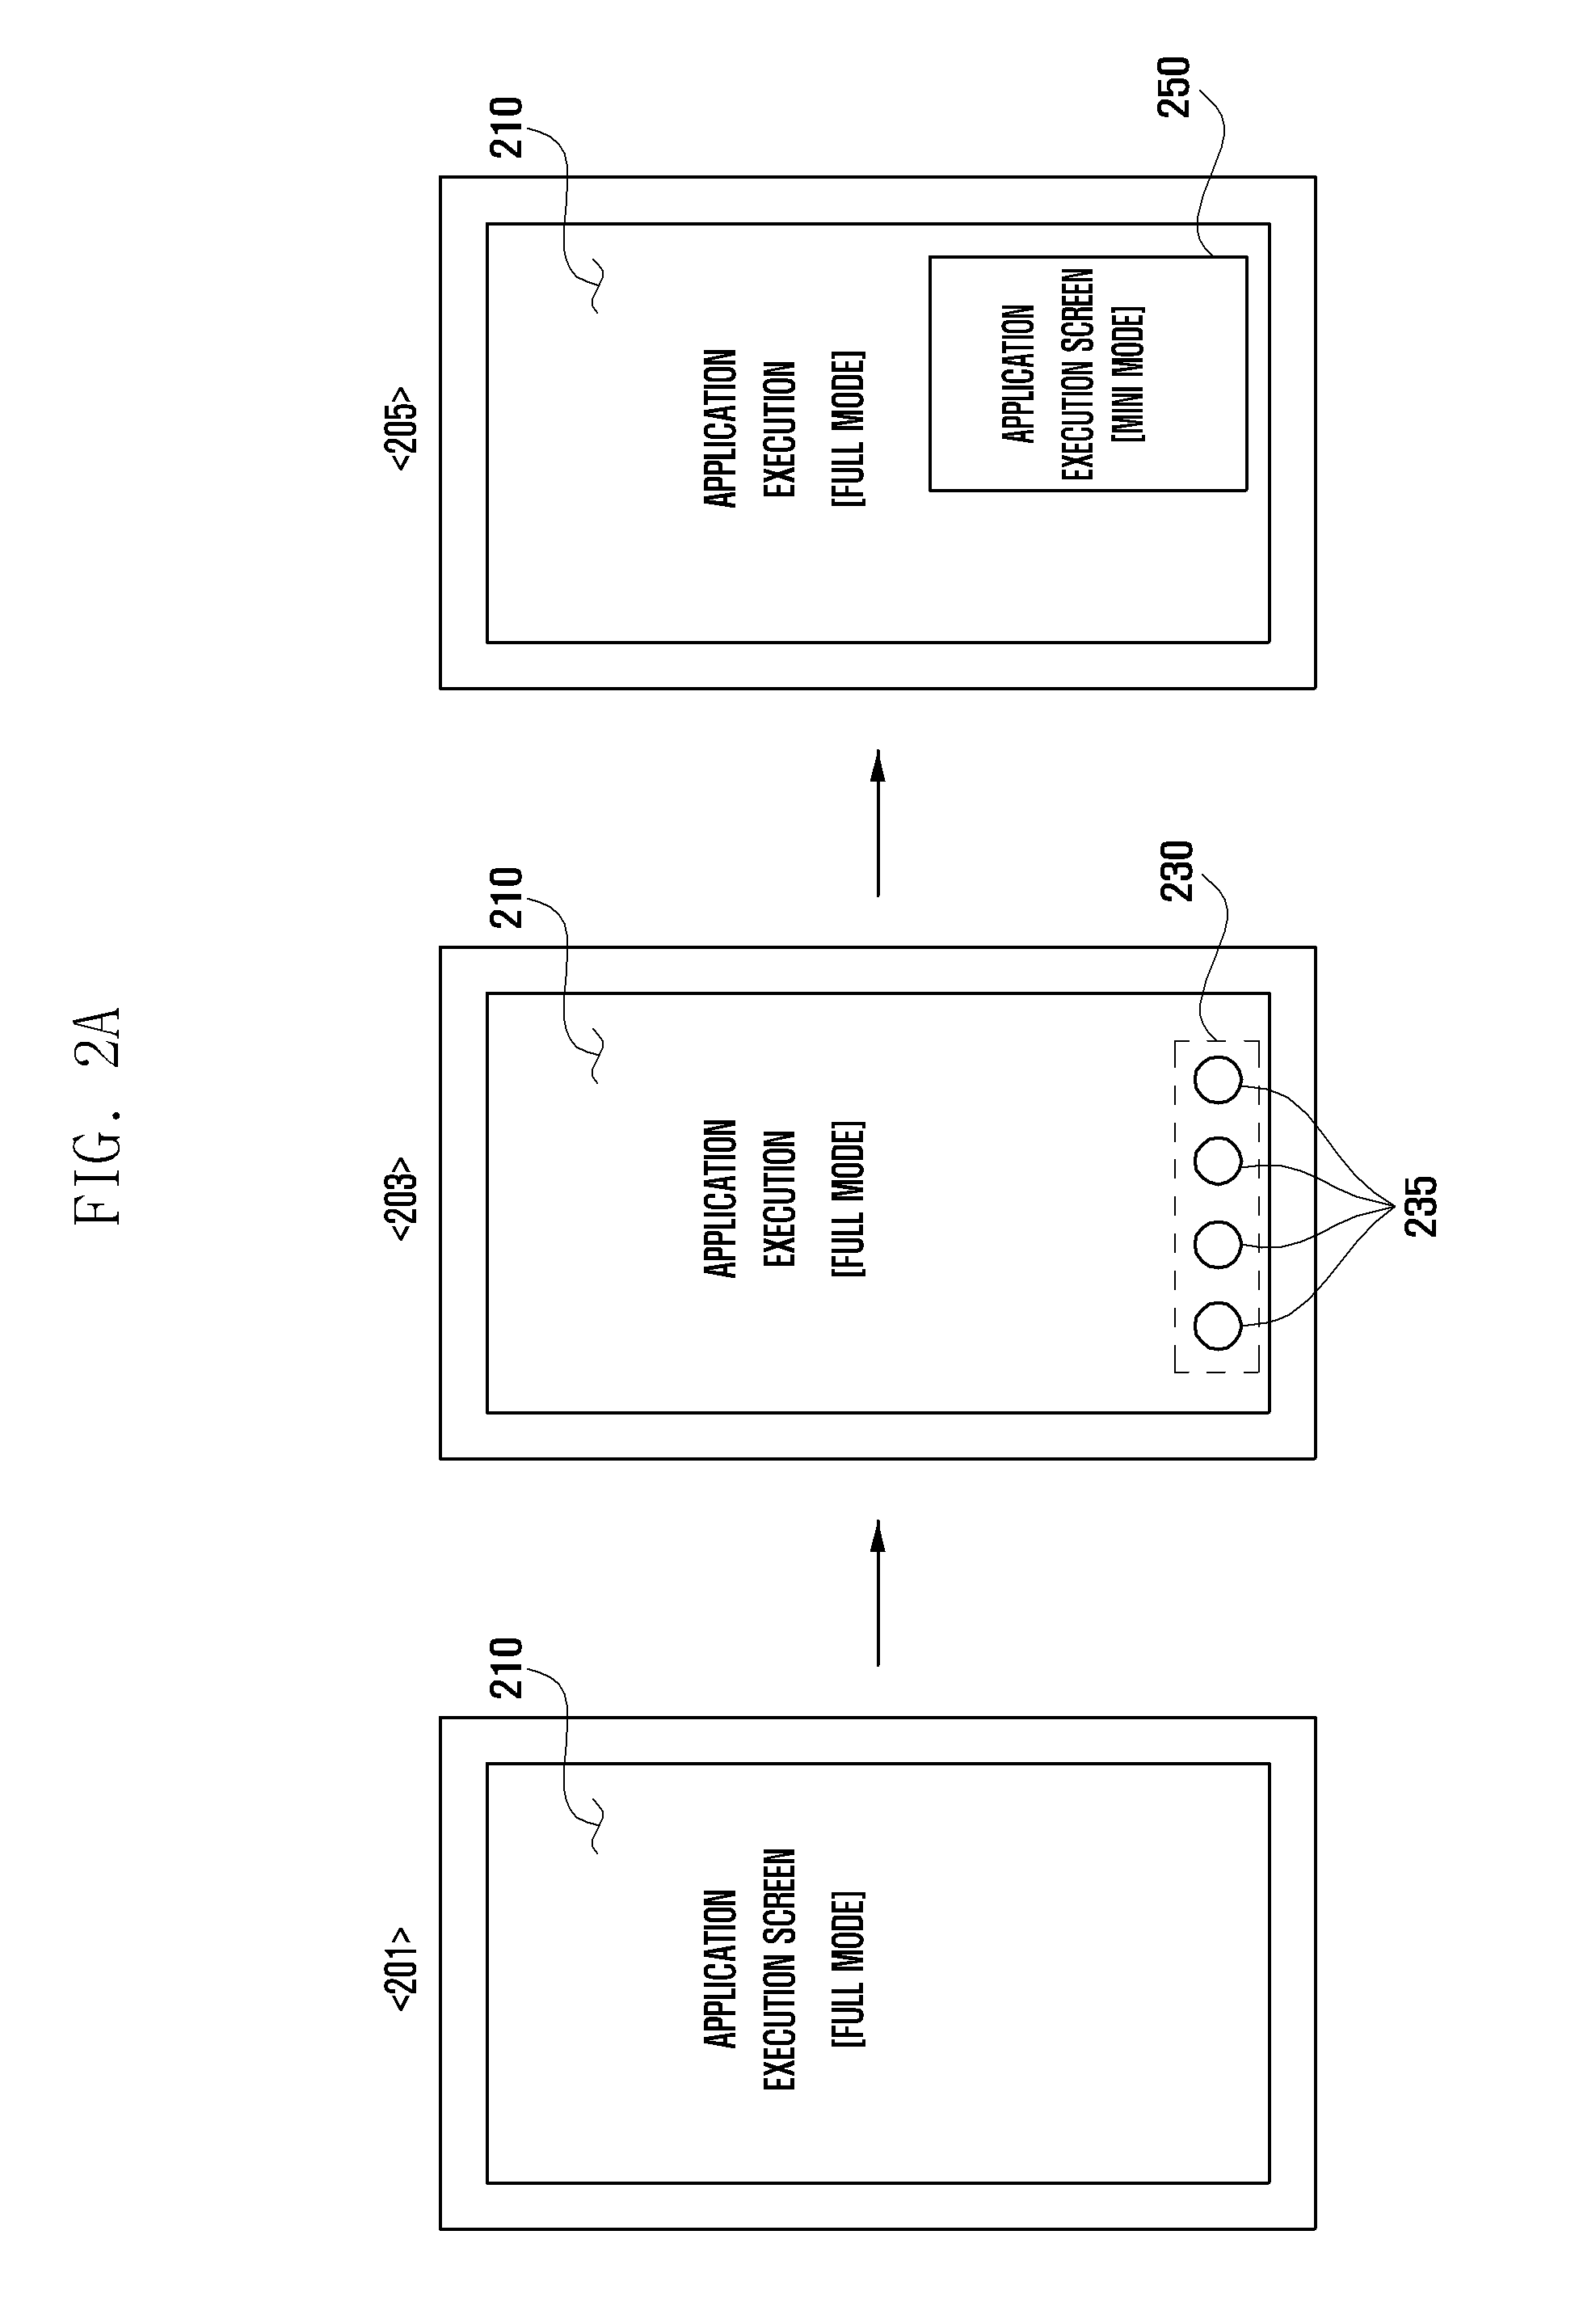 System and method for executing multiple tasks in a mobile device